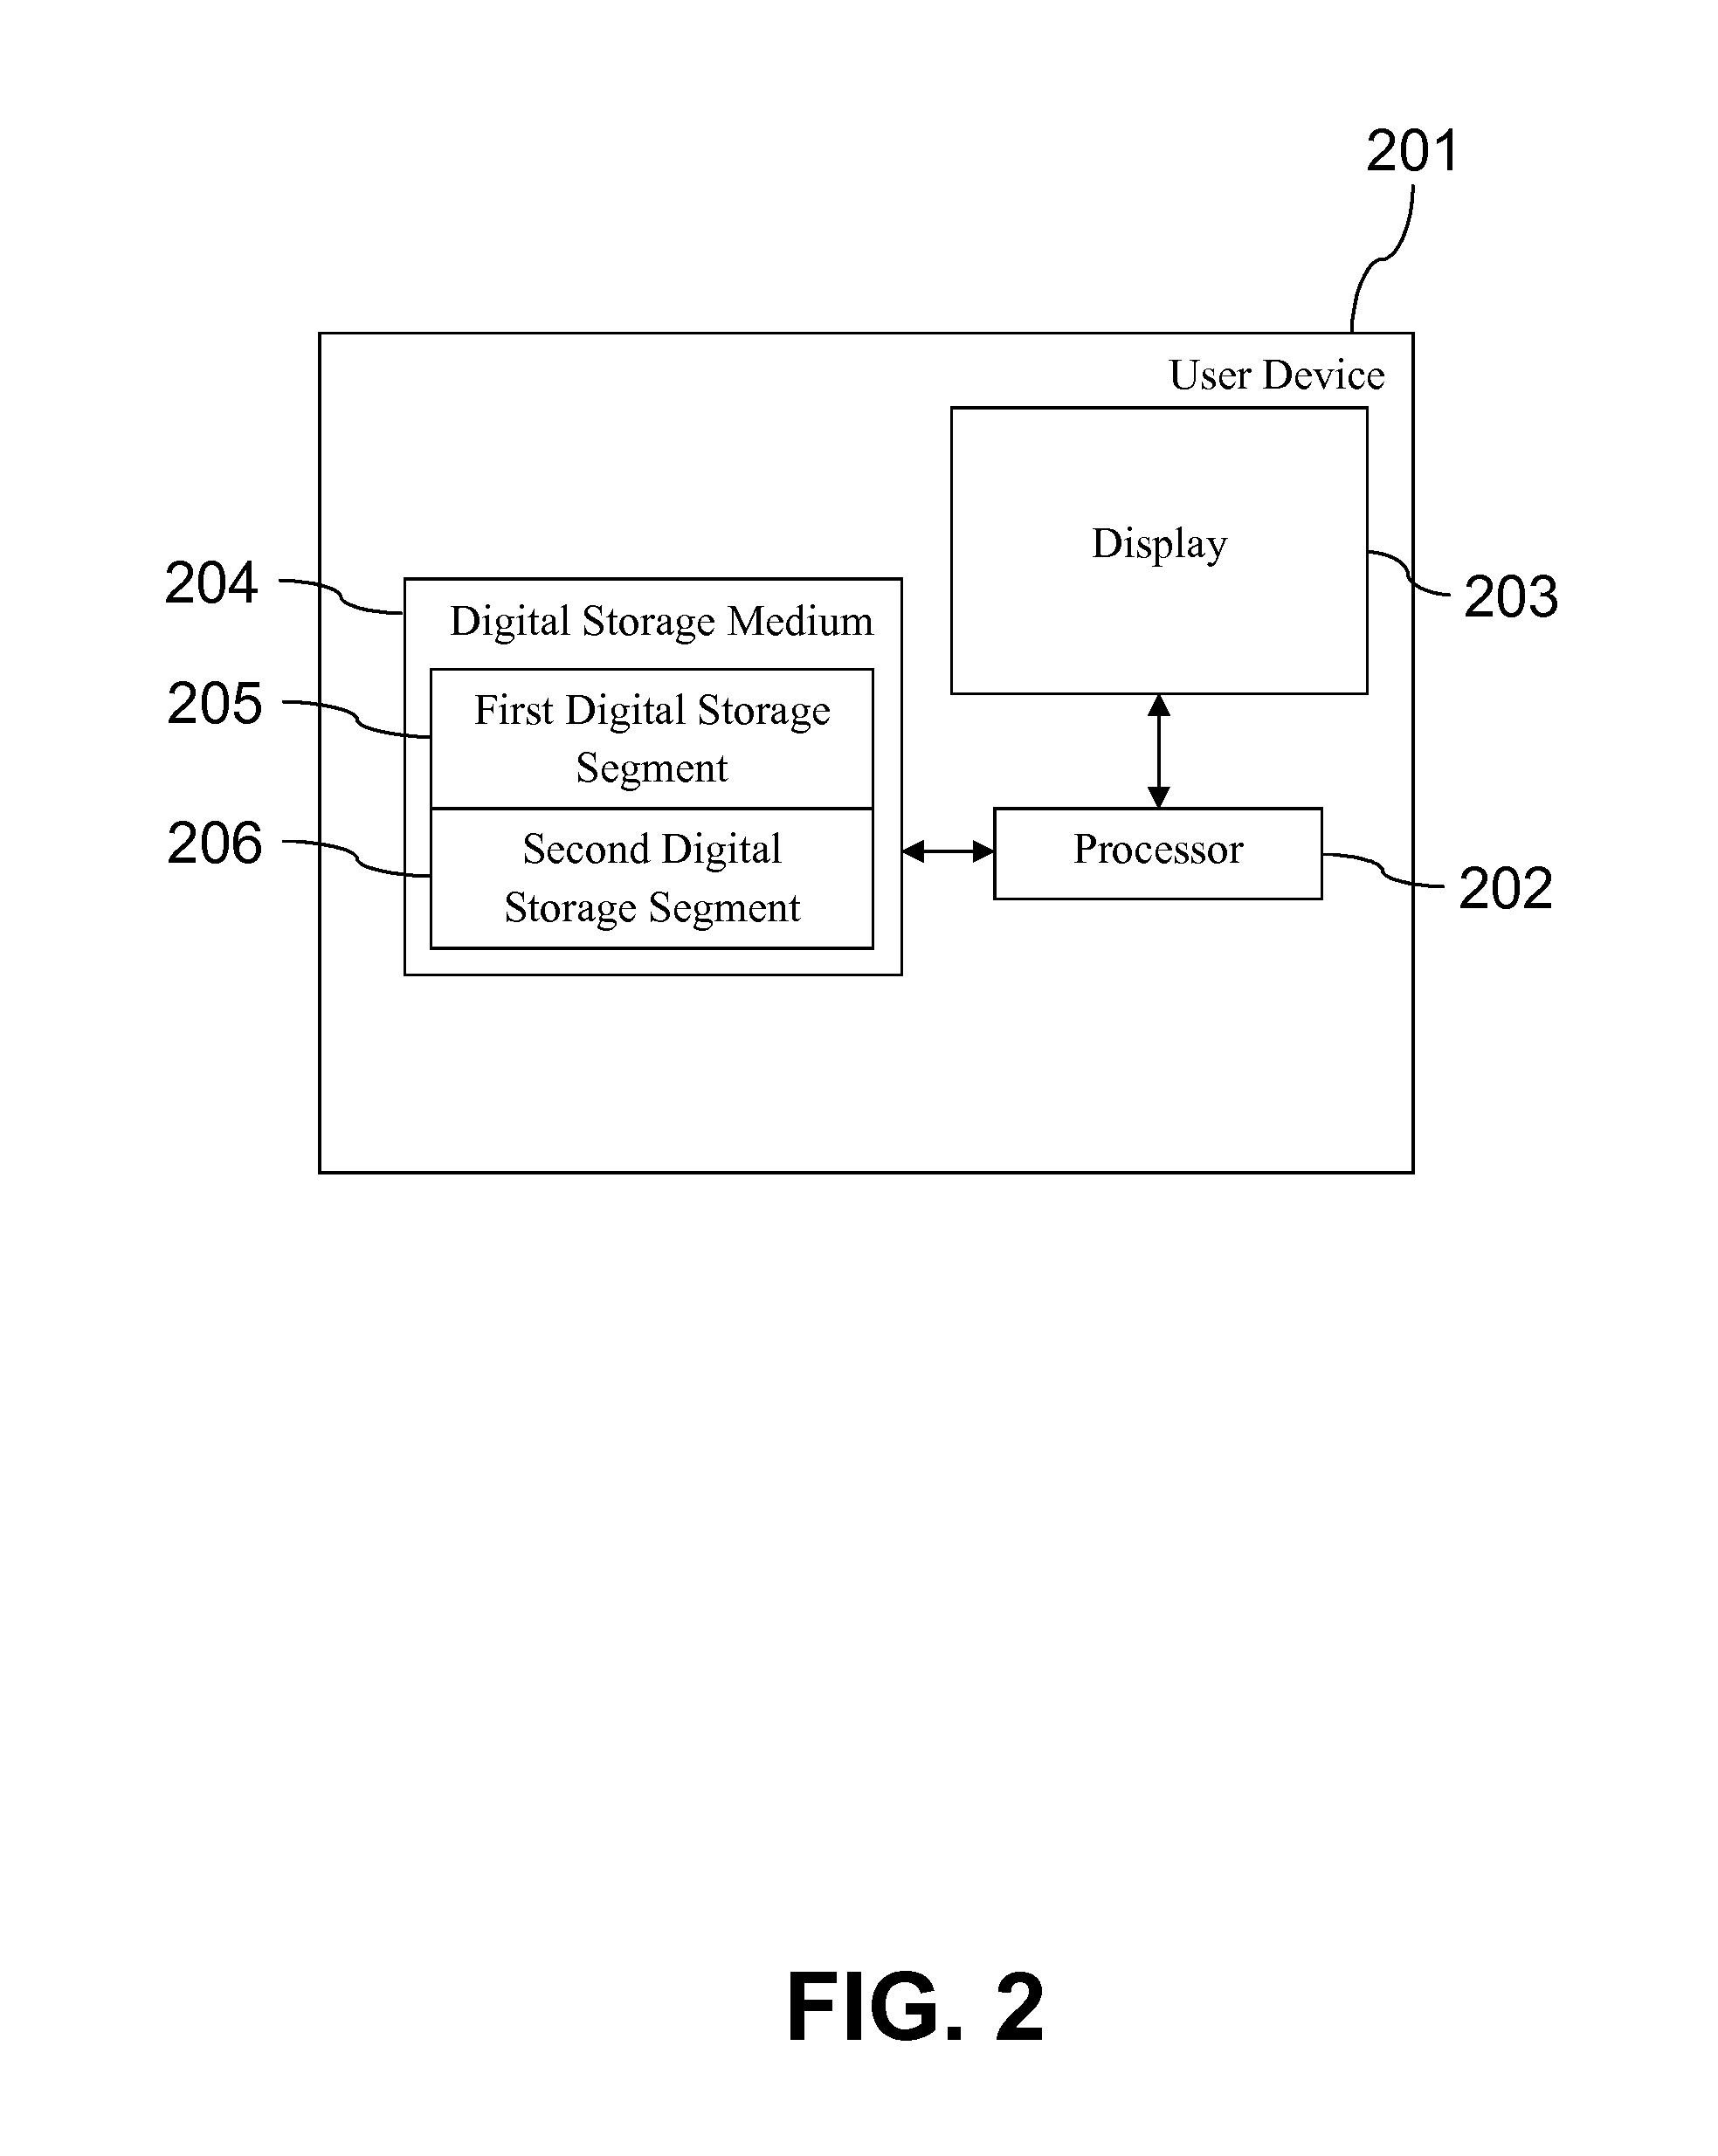 Enhanced electronic health record graphical user interface system